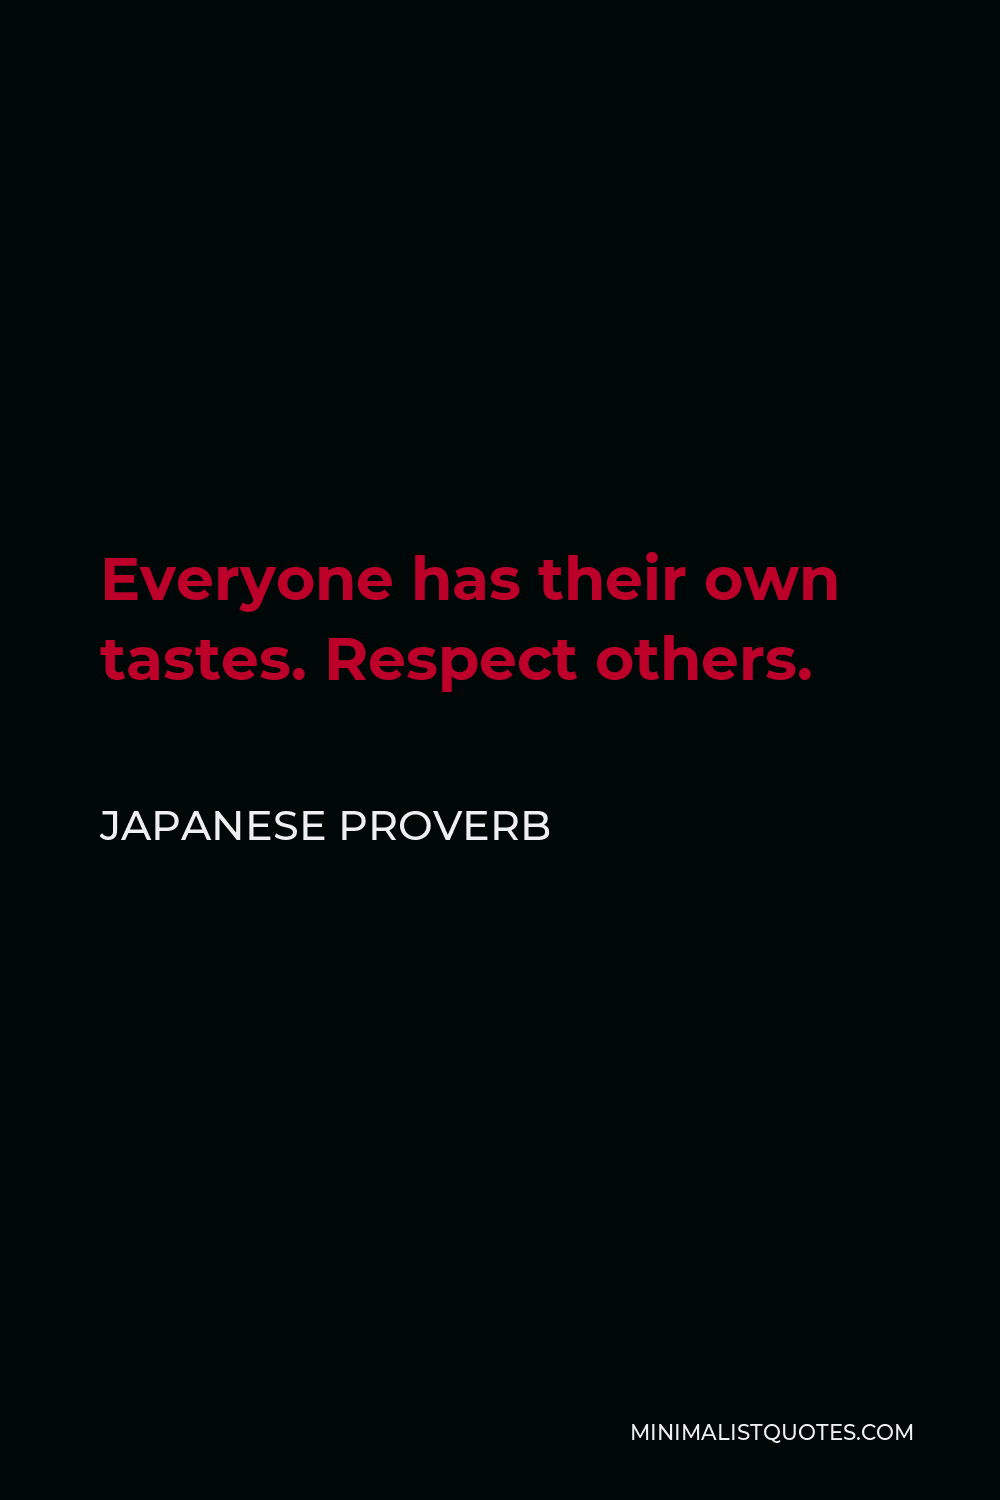 Japanese Proverb Quote - Everyone has their own tastes. Respect others.